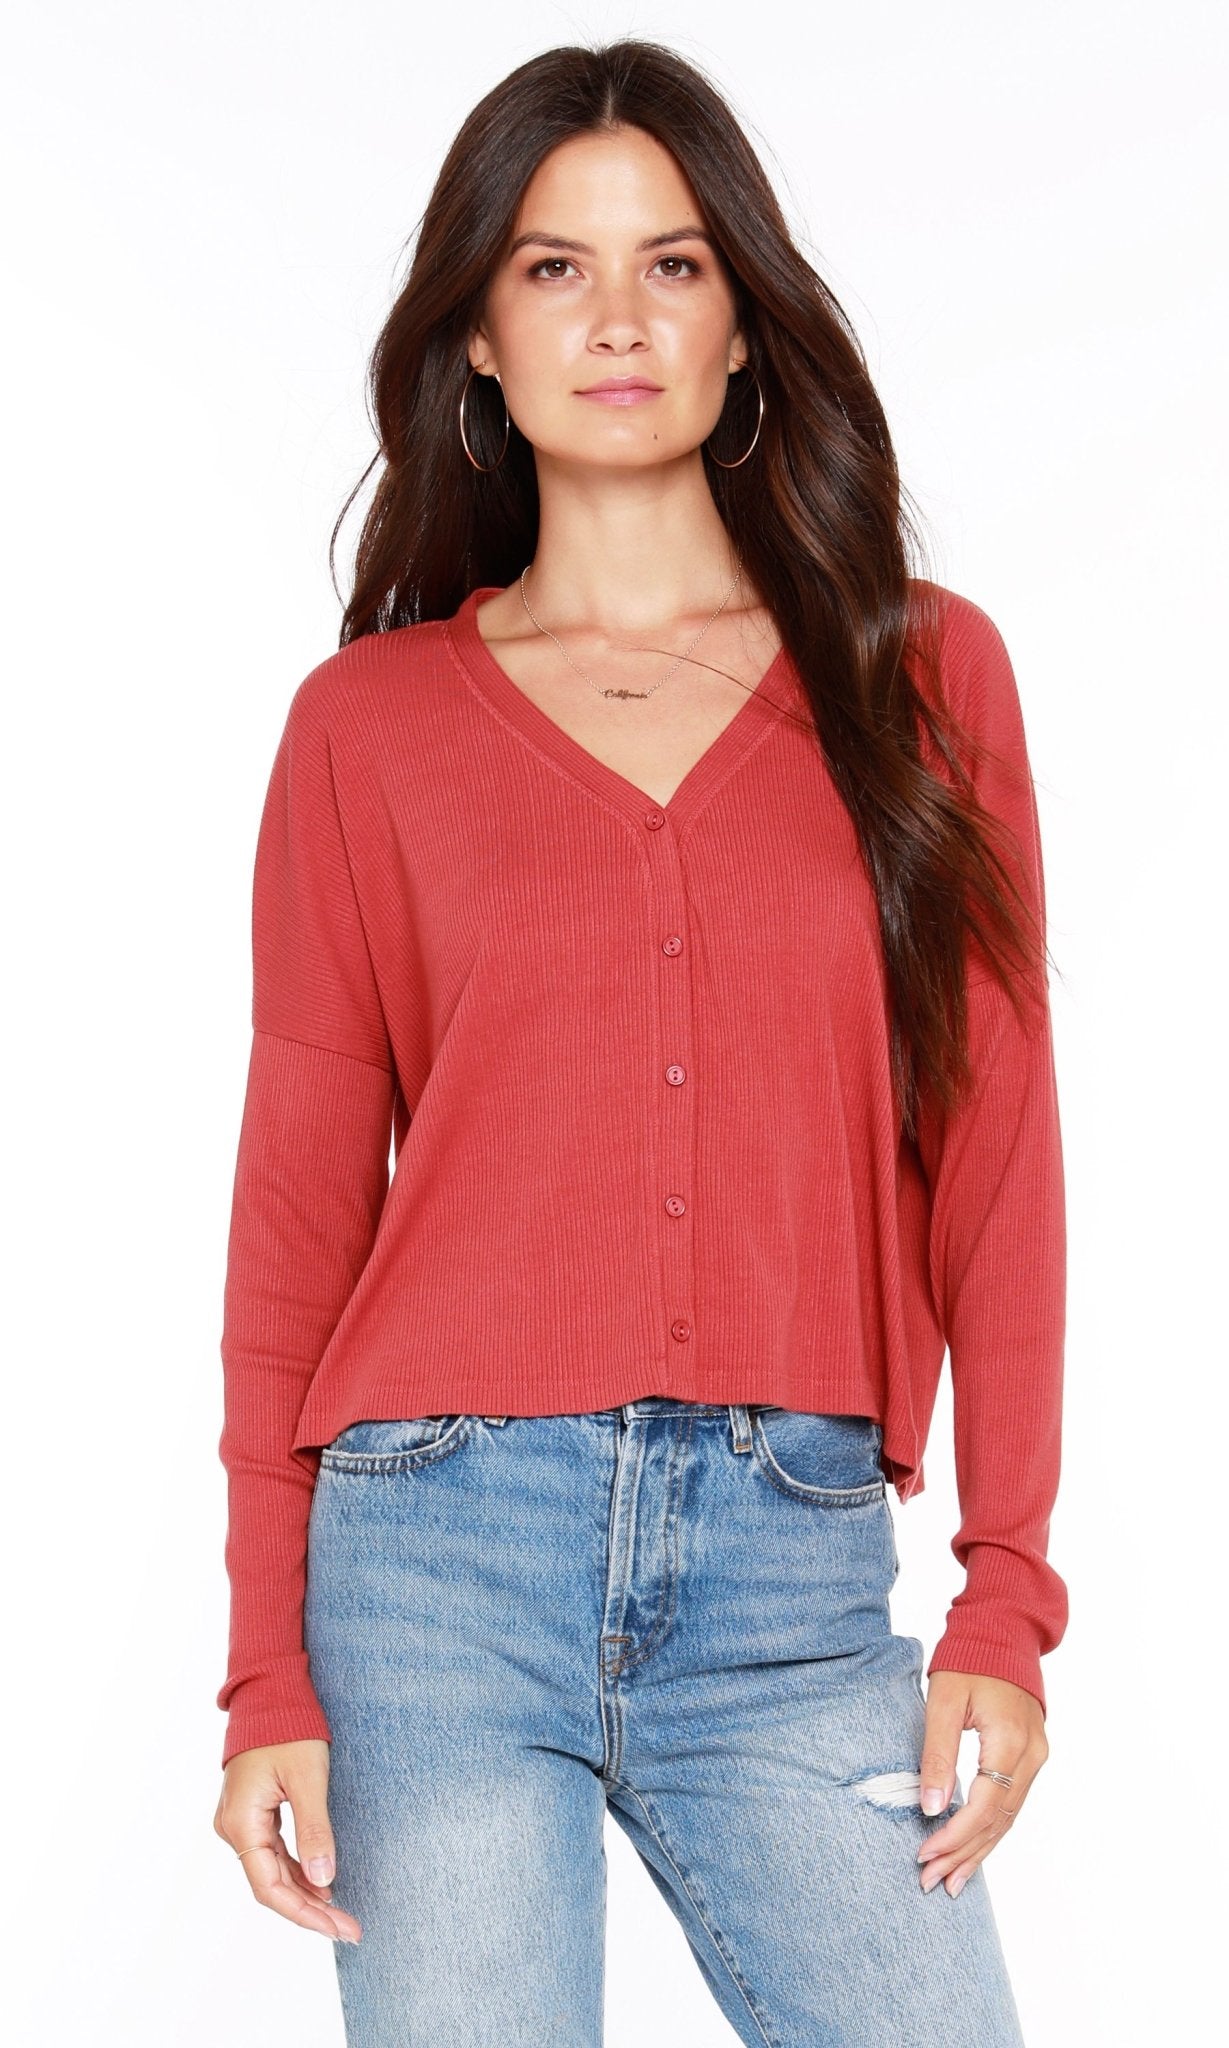 Ribbed Button Up Top - The Posh Loft